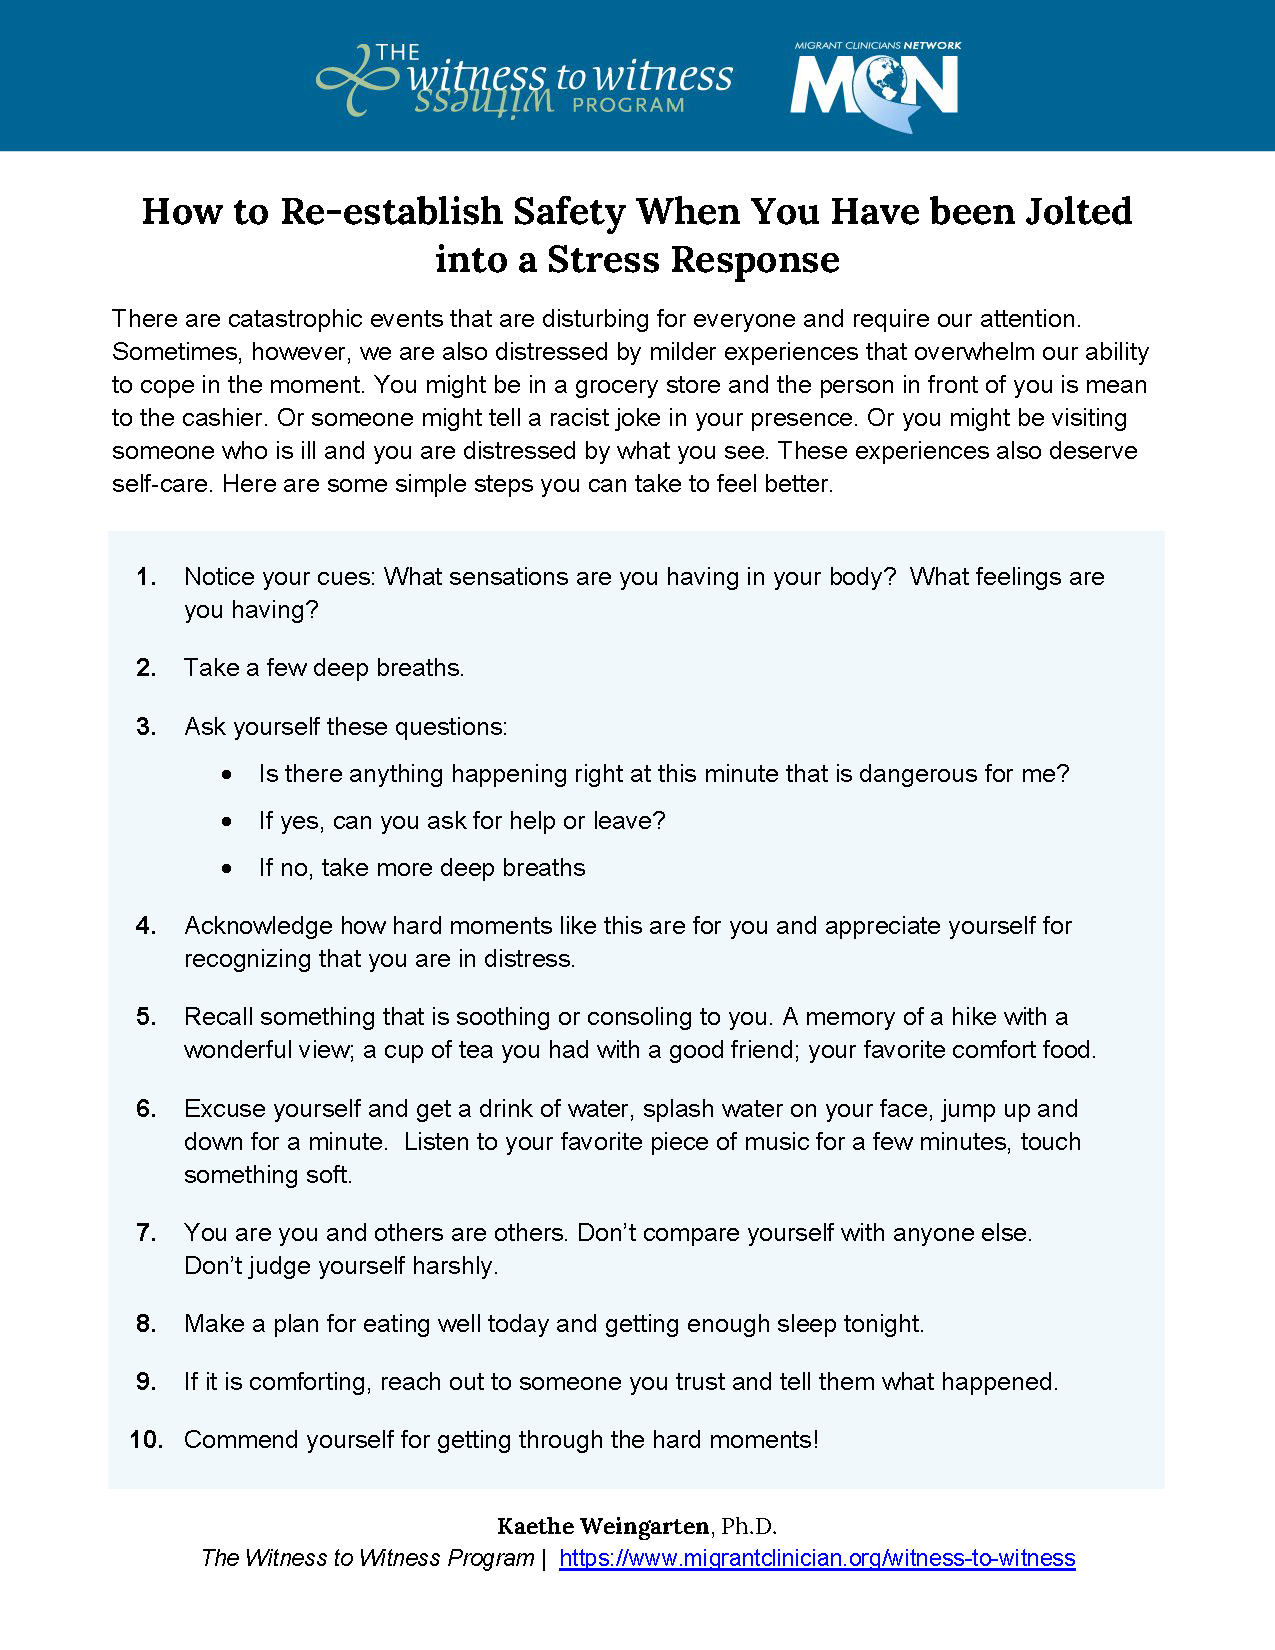 How to Re-establish Safety When You Have been Jolted into a Stress Response